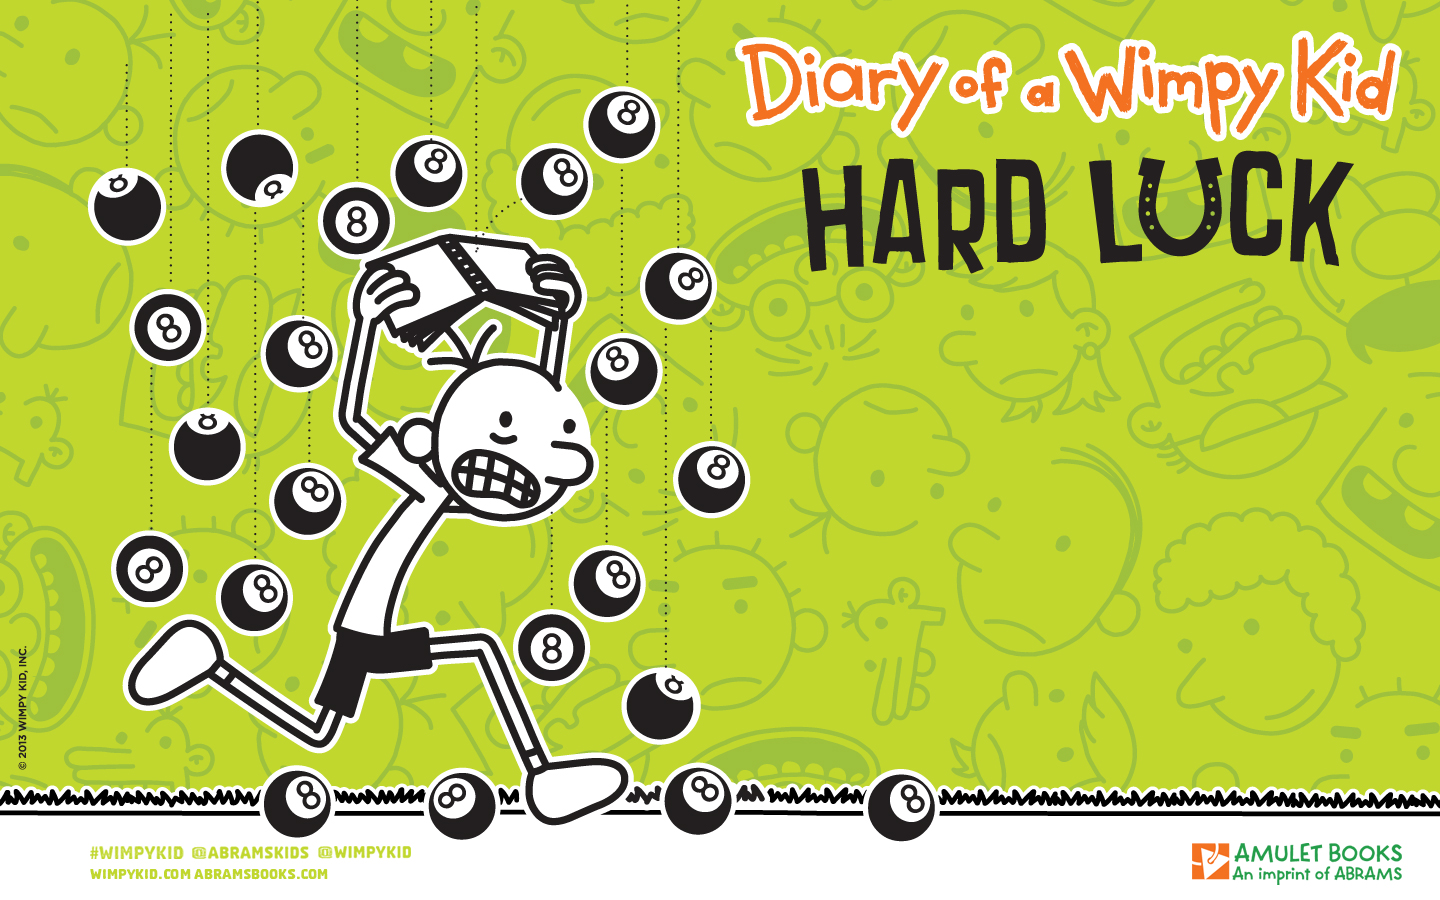 Follow wimpykid on and use the hashtag wimpykid